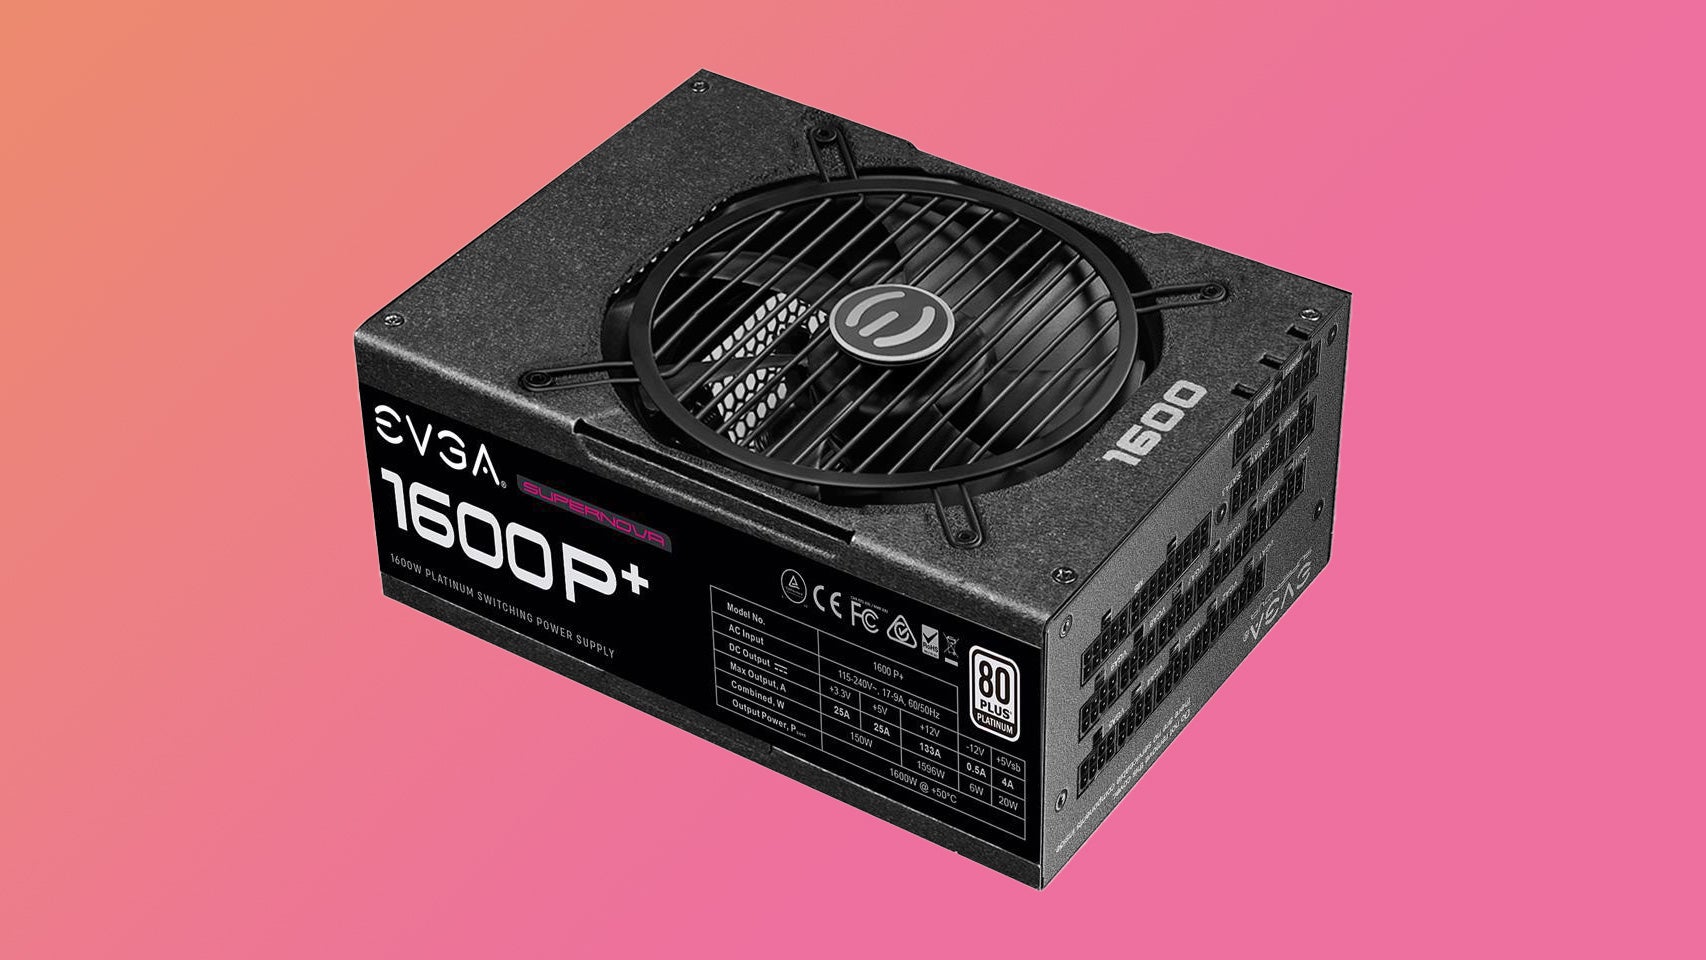 evga 1600 p plus power supply, with a 1600w capacity, 80+ platinum rating and fully modular design